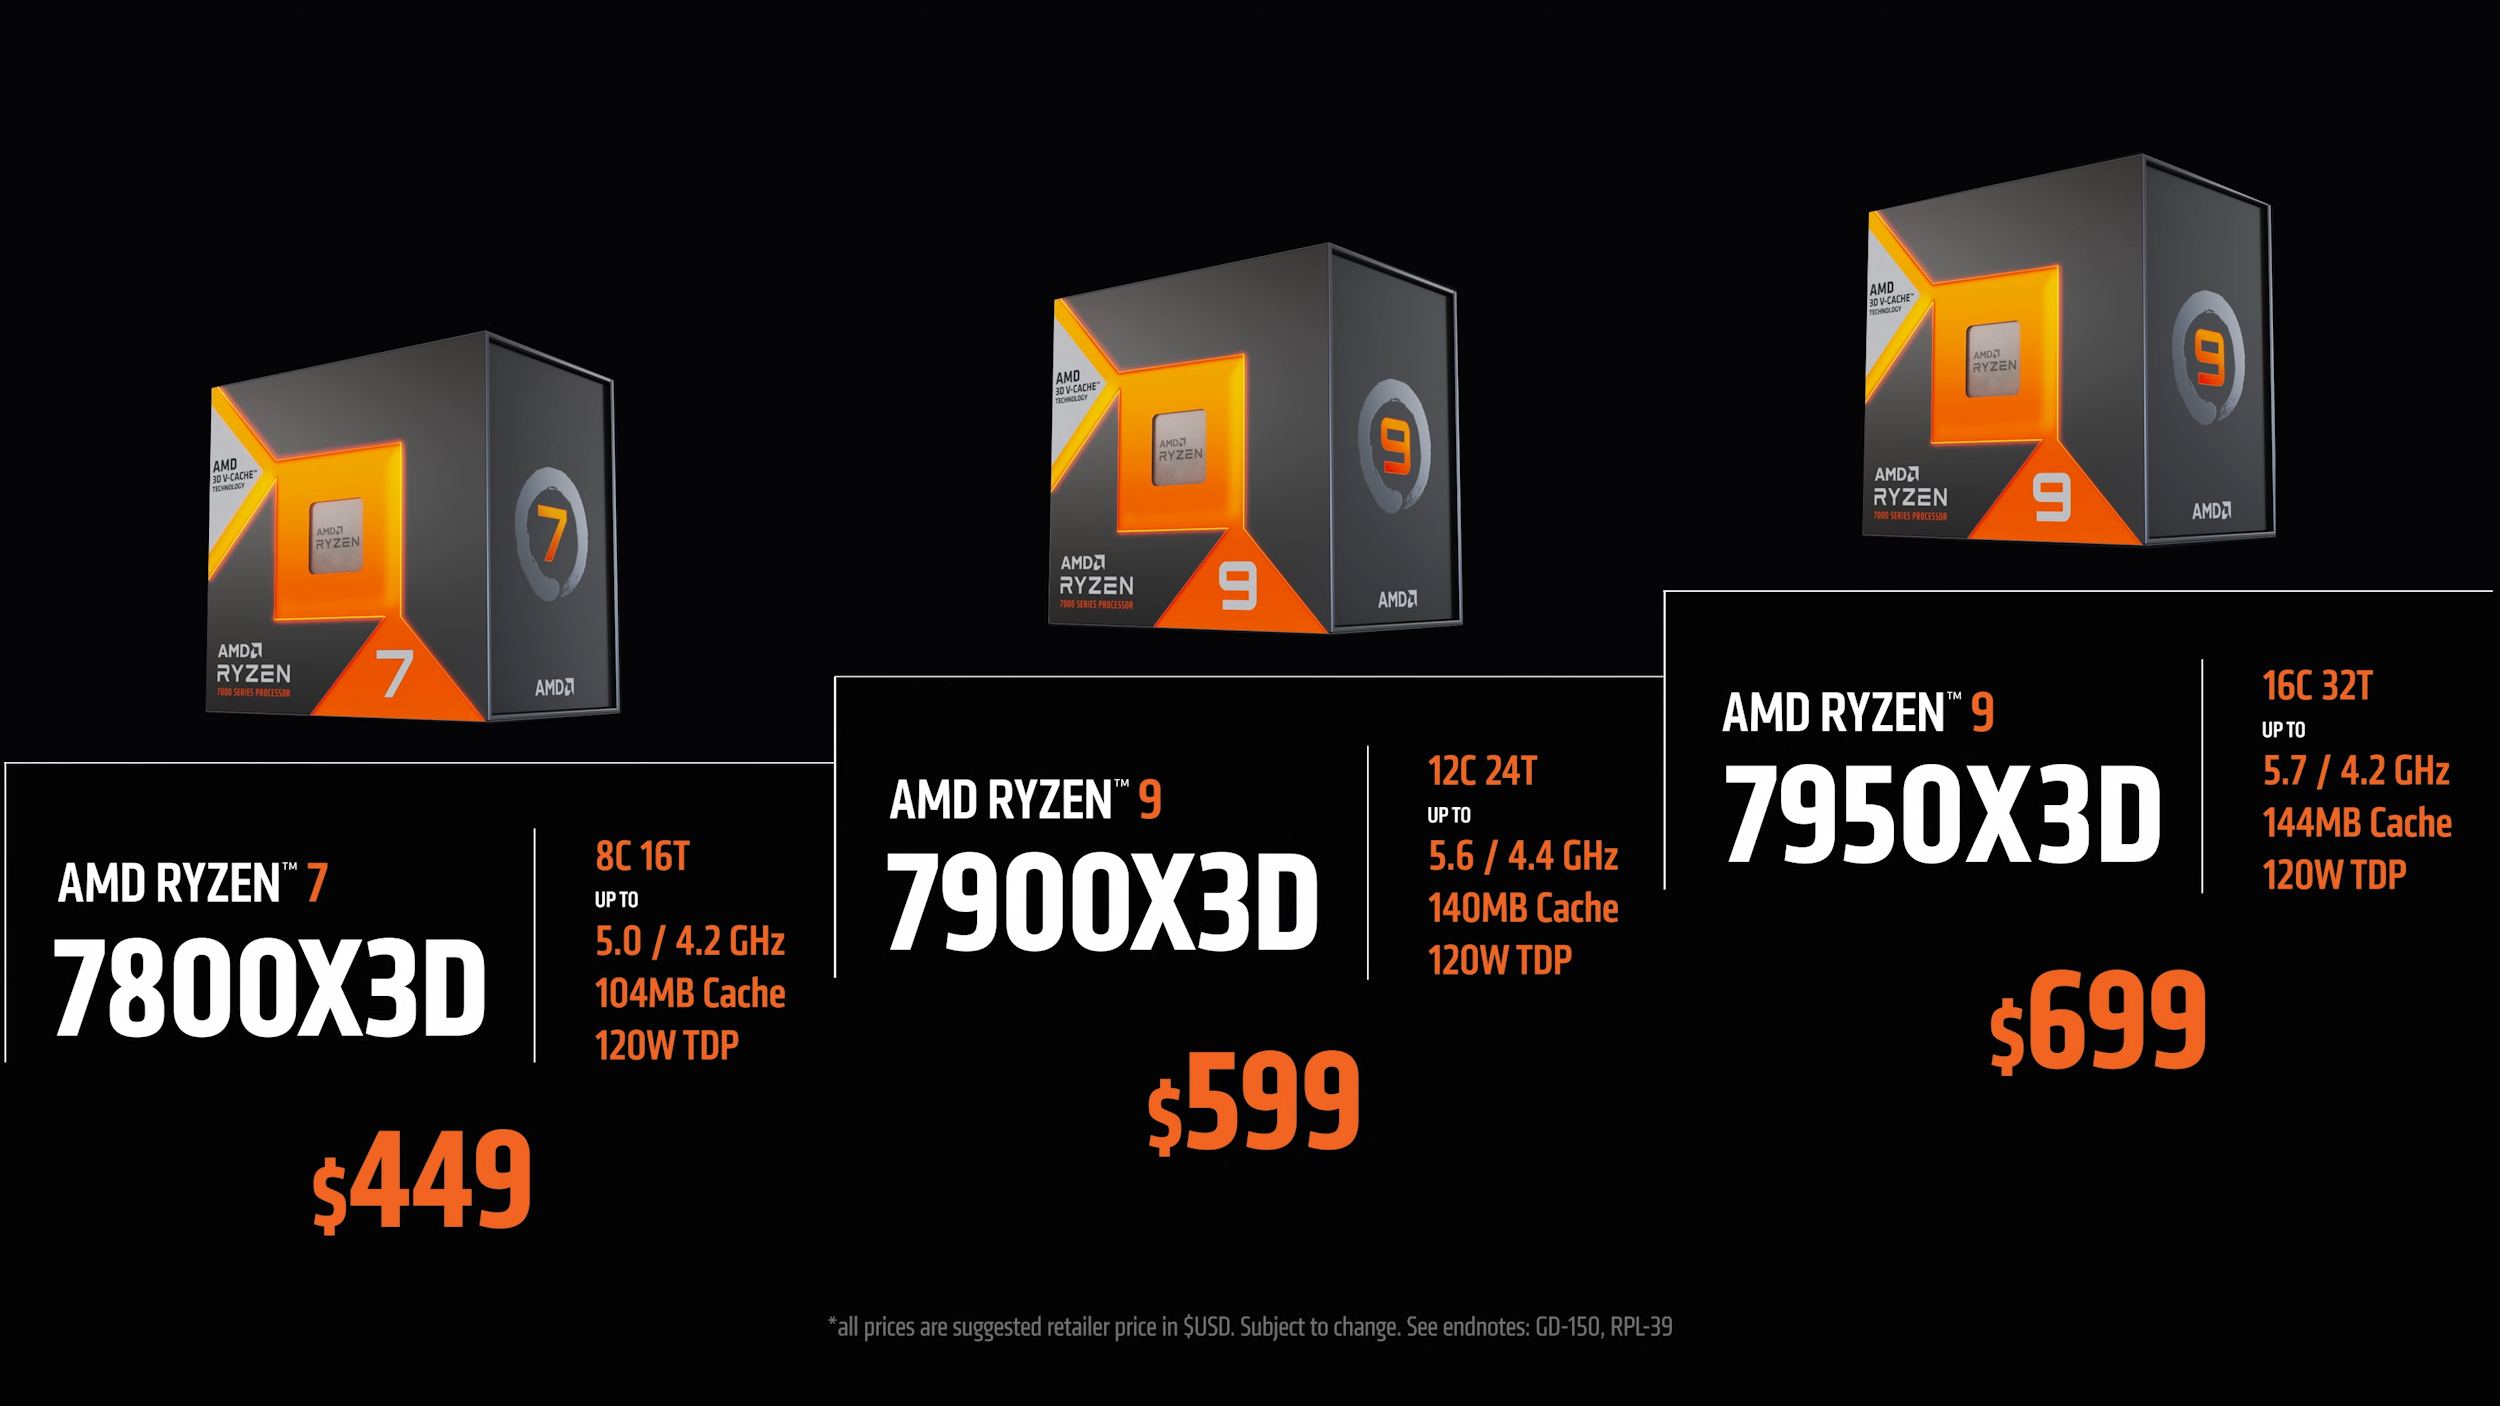 AMD Ryzen 7 7800X3D CPU Review: Performance, Thermals & Power Analysis -  Hardware Busters